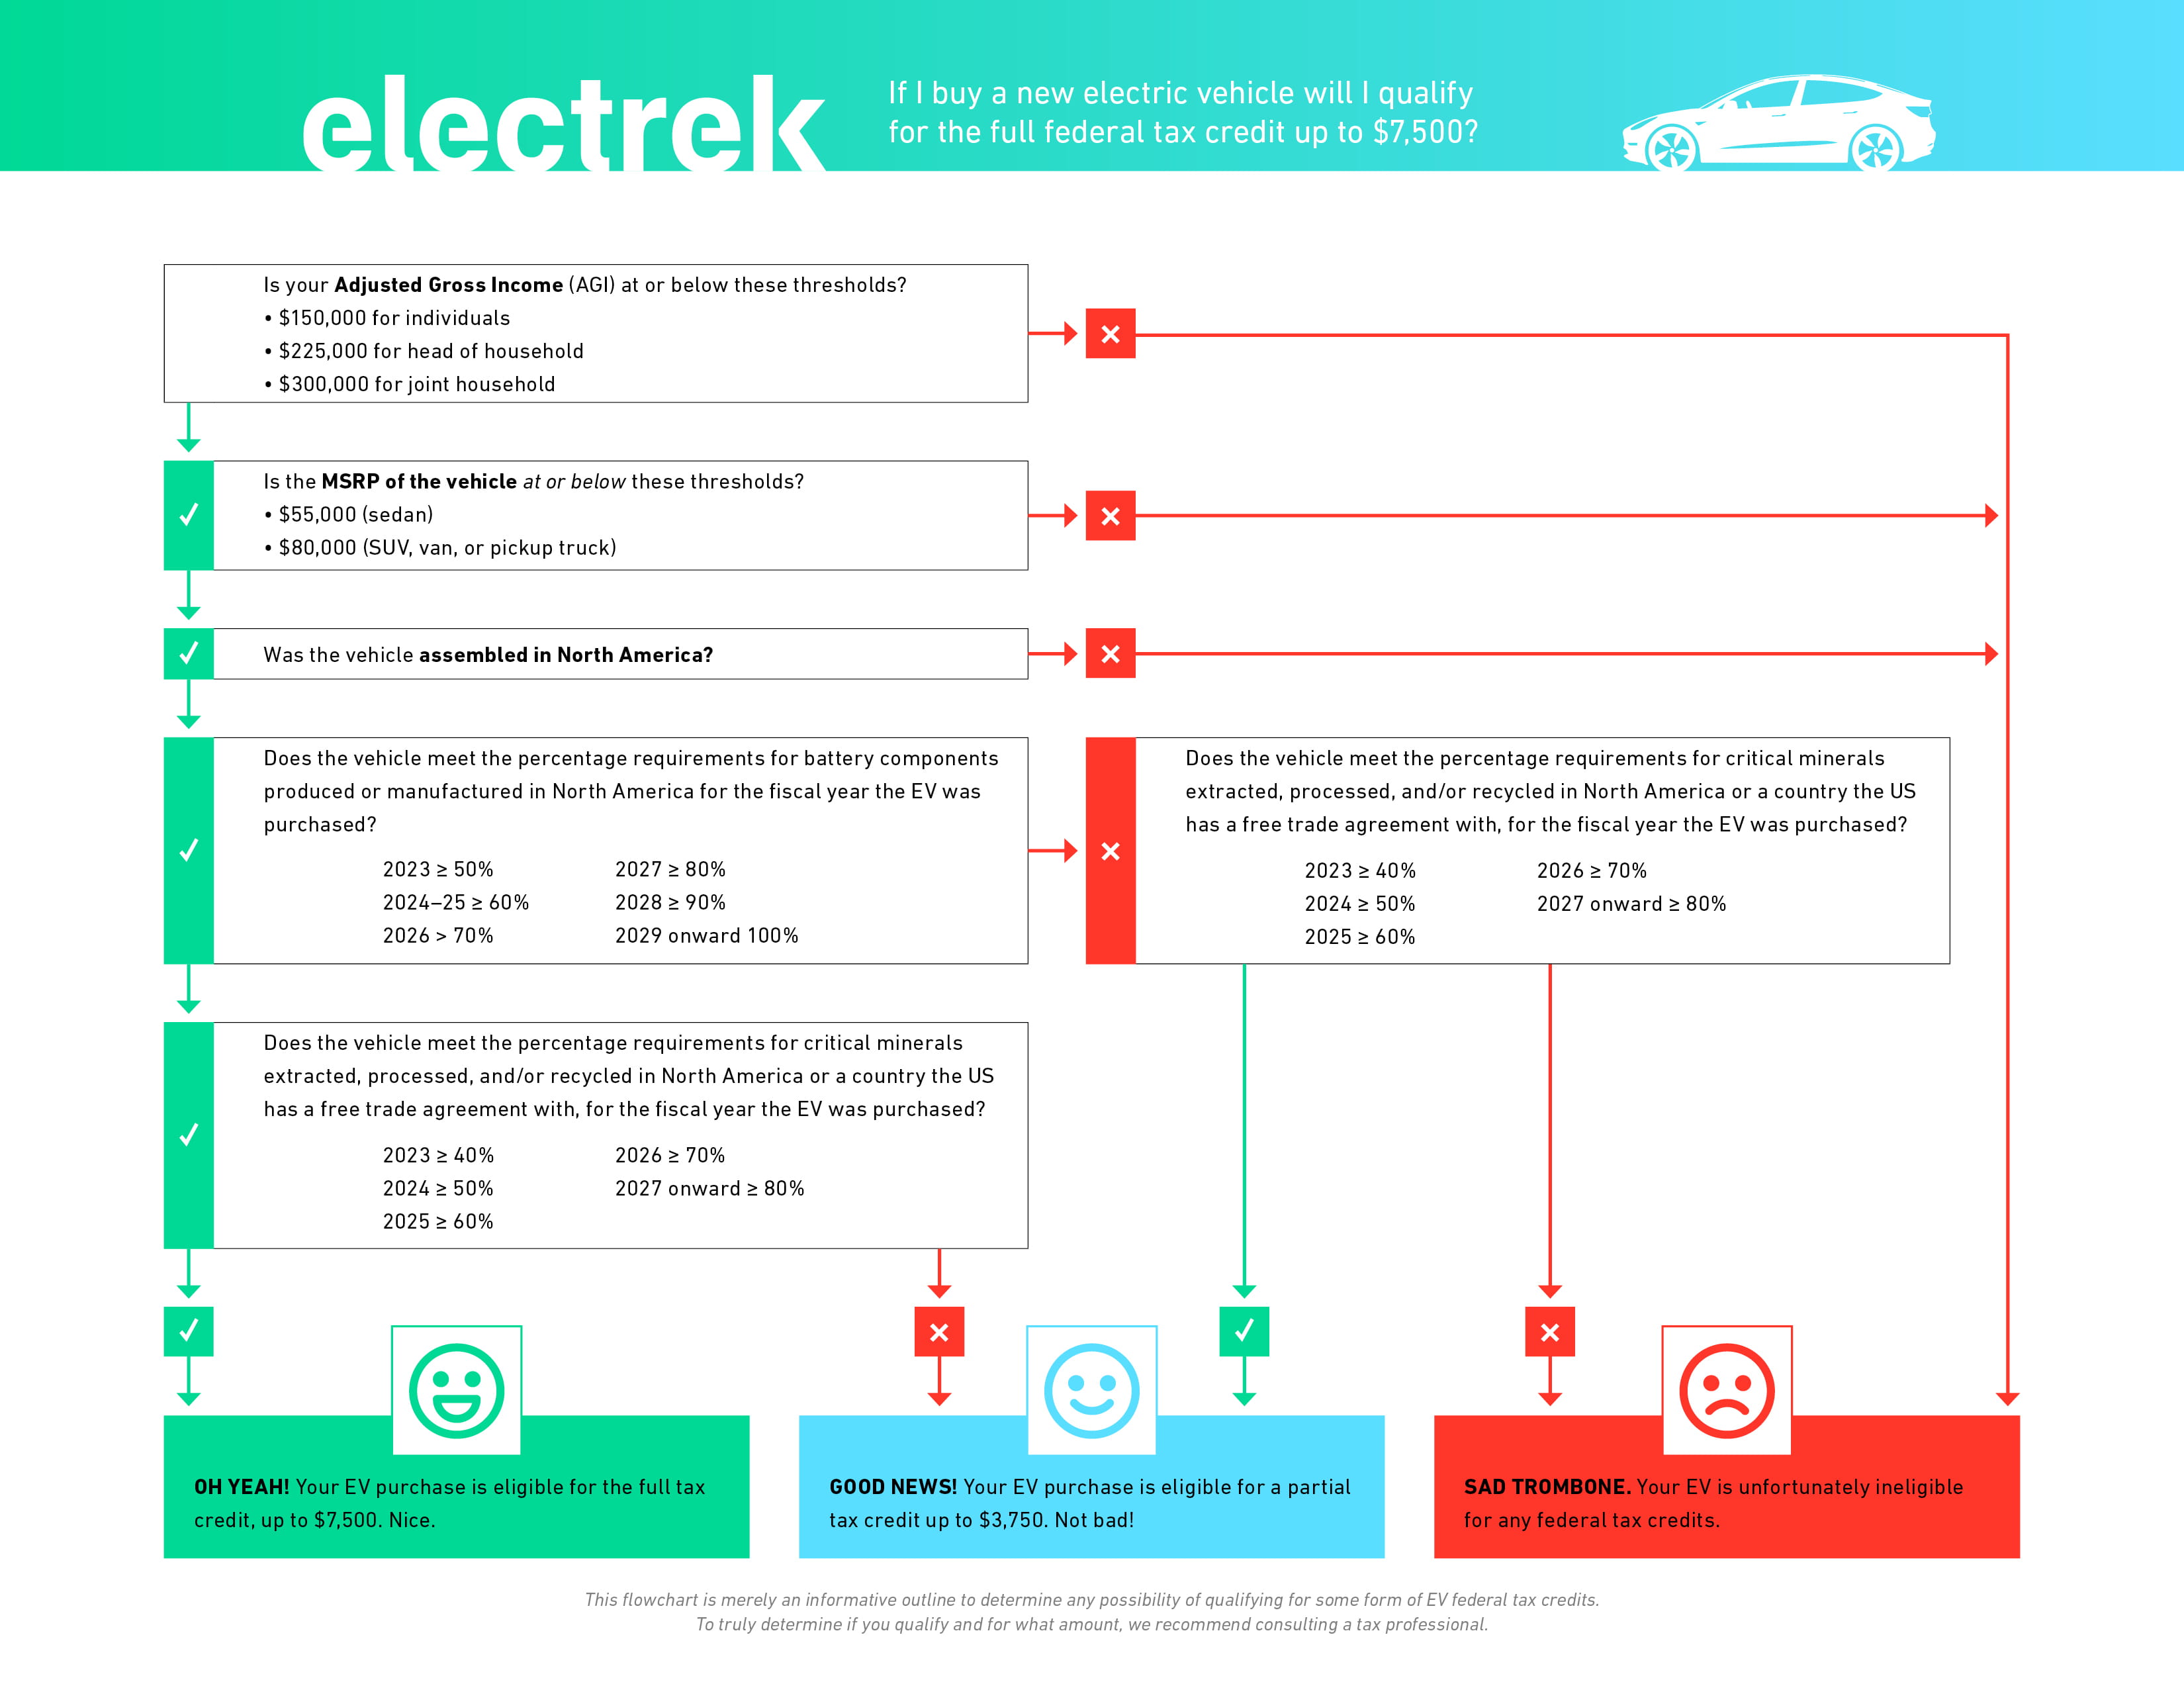 Everything you need to know about the IRS’s new EV tax credit guidance